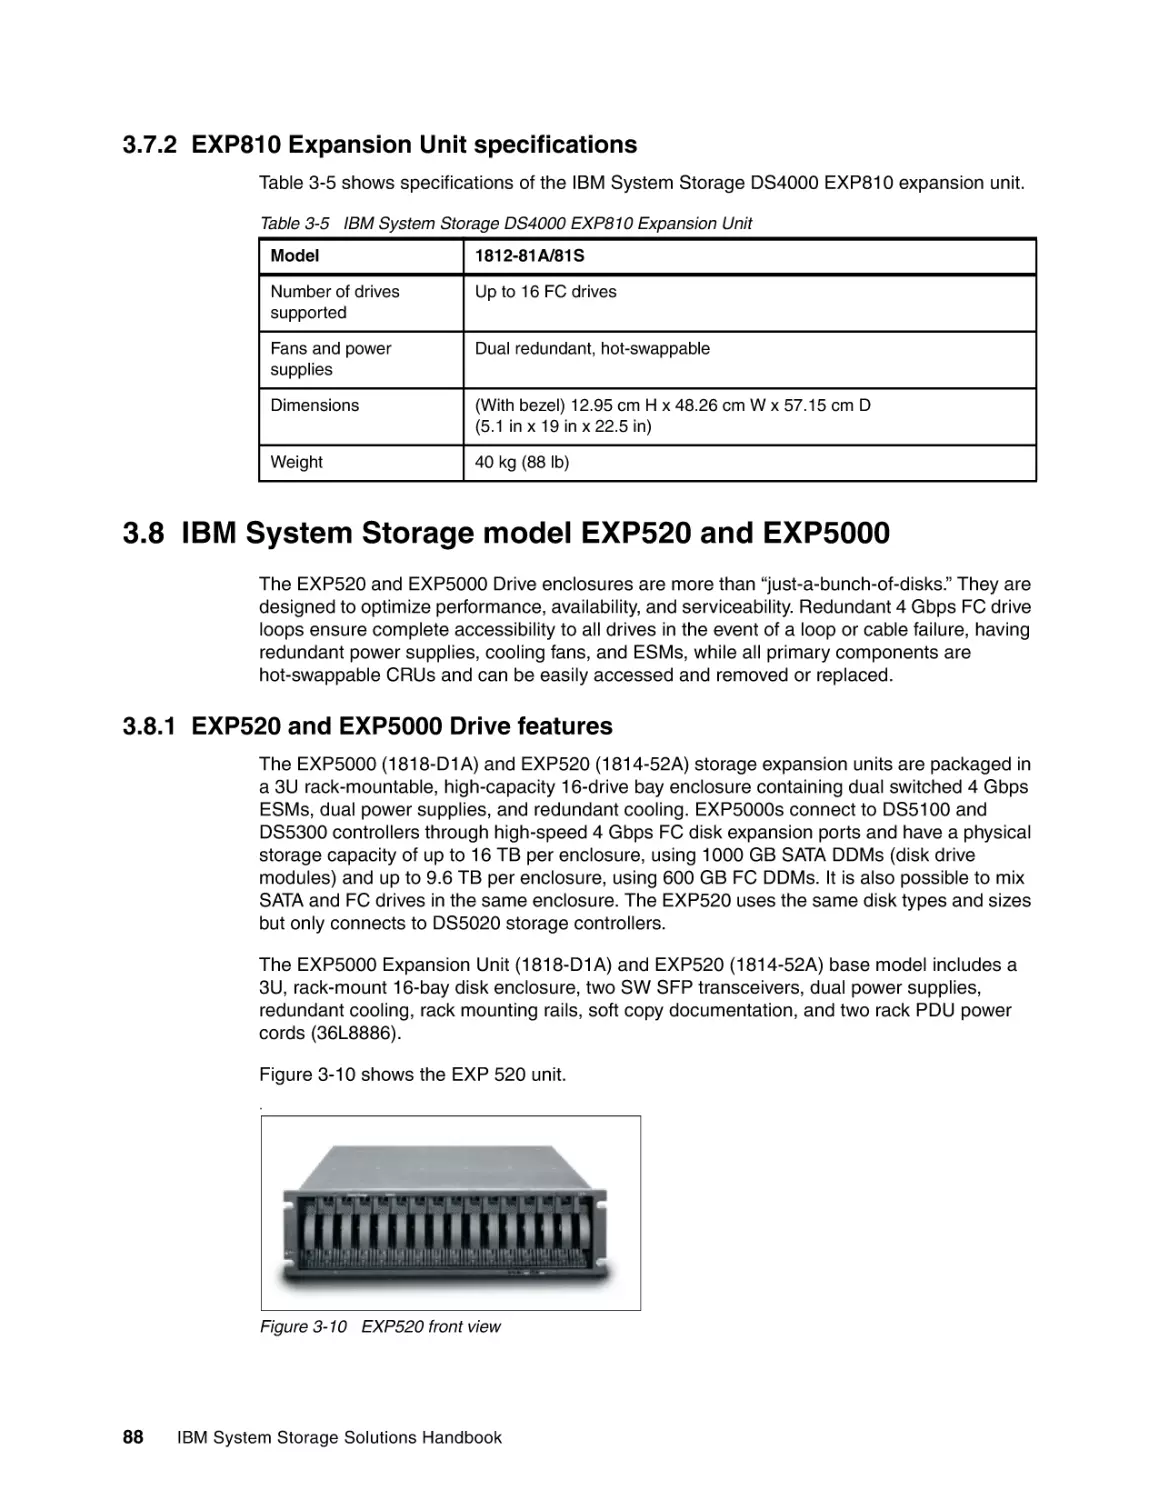 3.7.2 EXP810 Expansion Unit specifications
3.8 IBM System Storage model EXP520 and EXP5000
3.8.1 EXP520 and EXP5000 Drive features